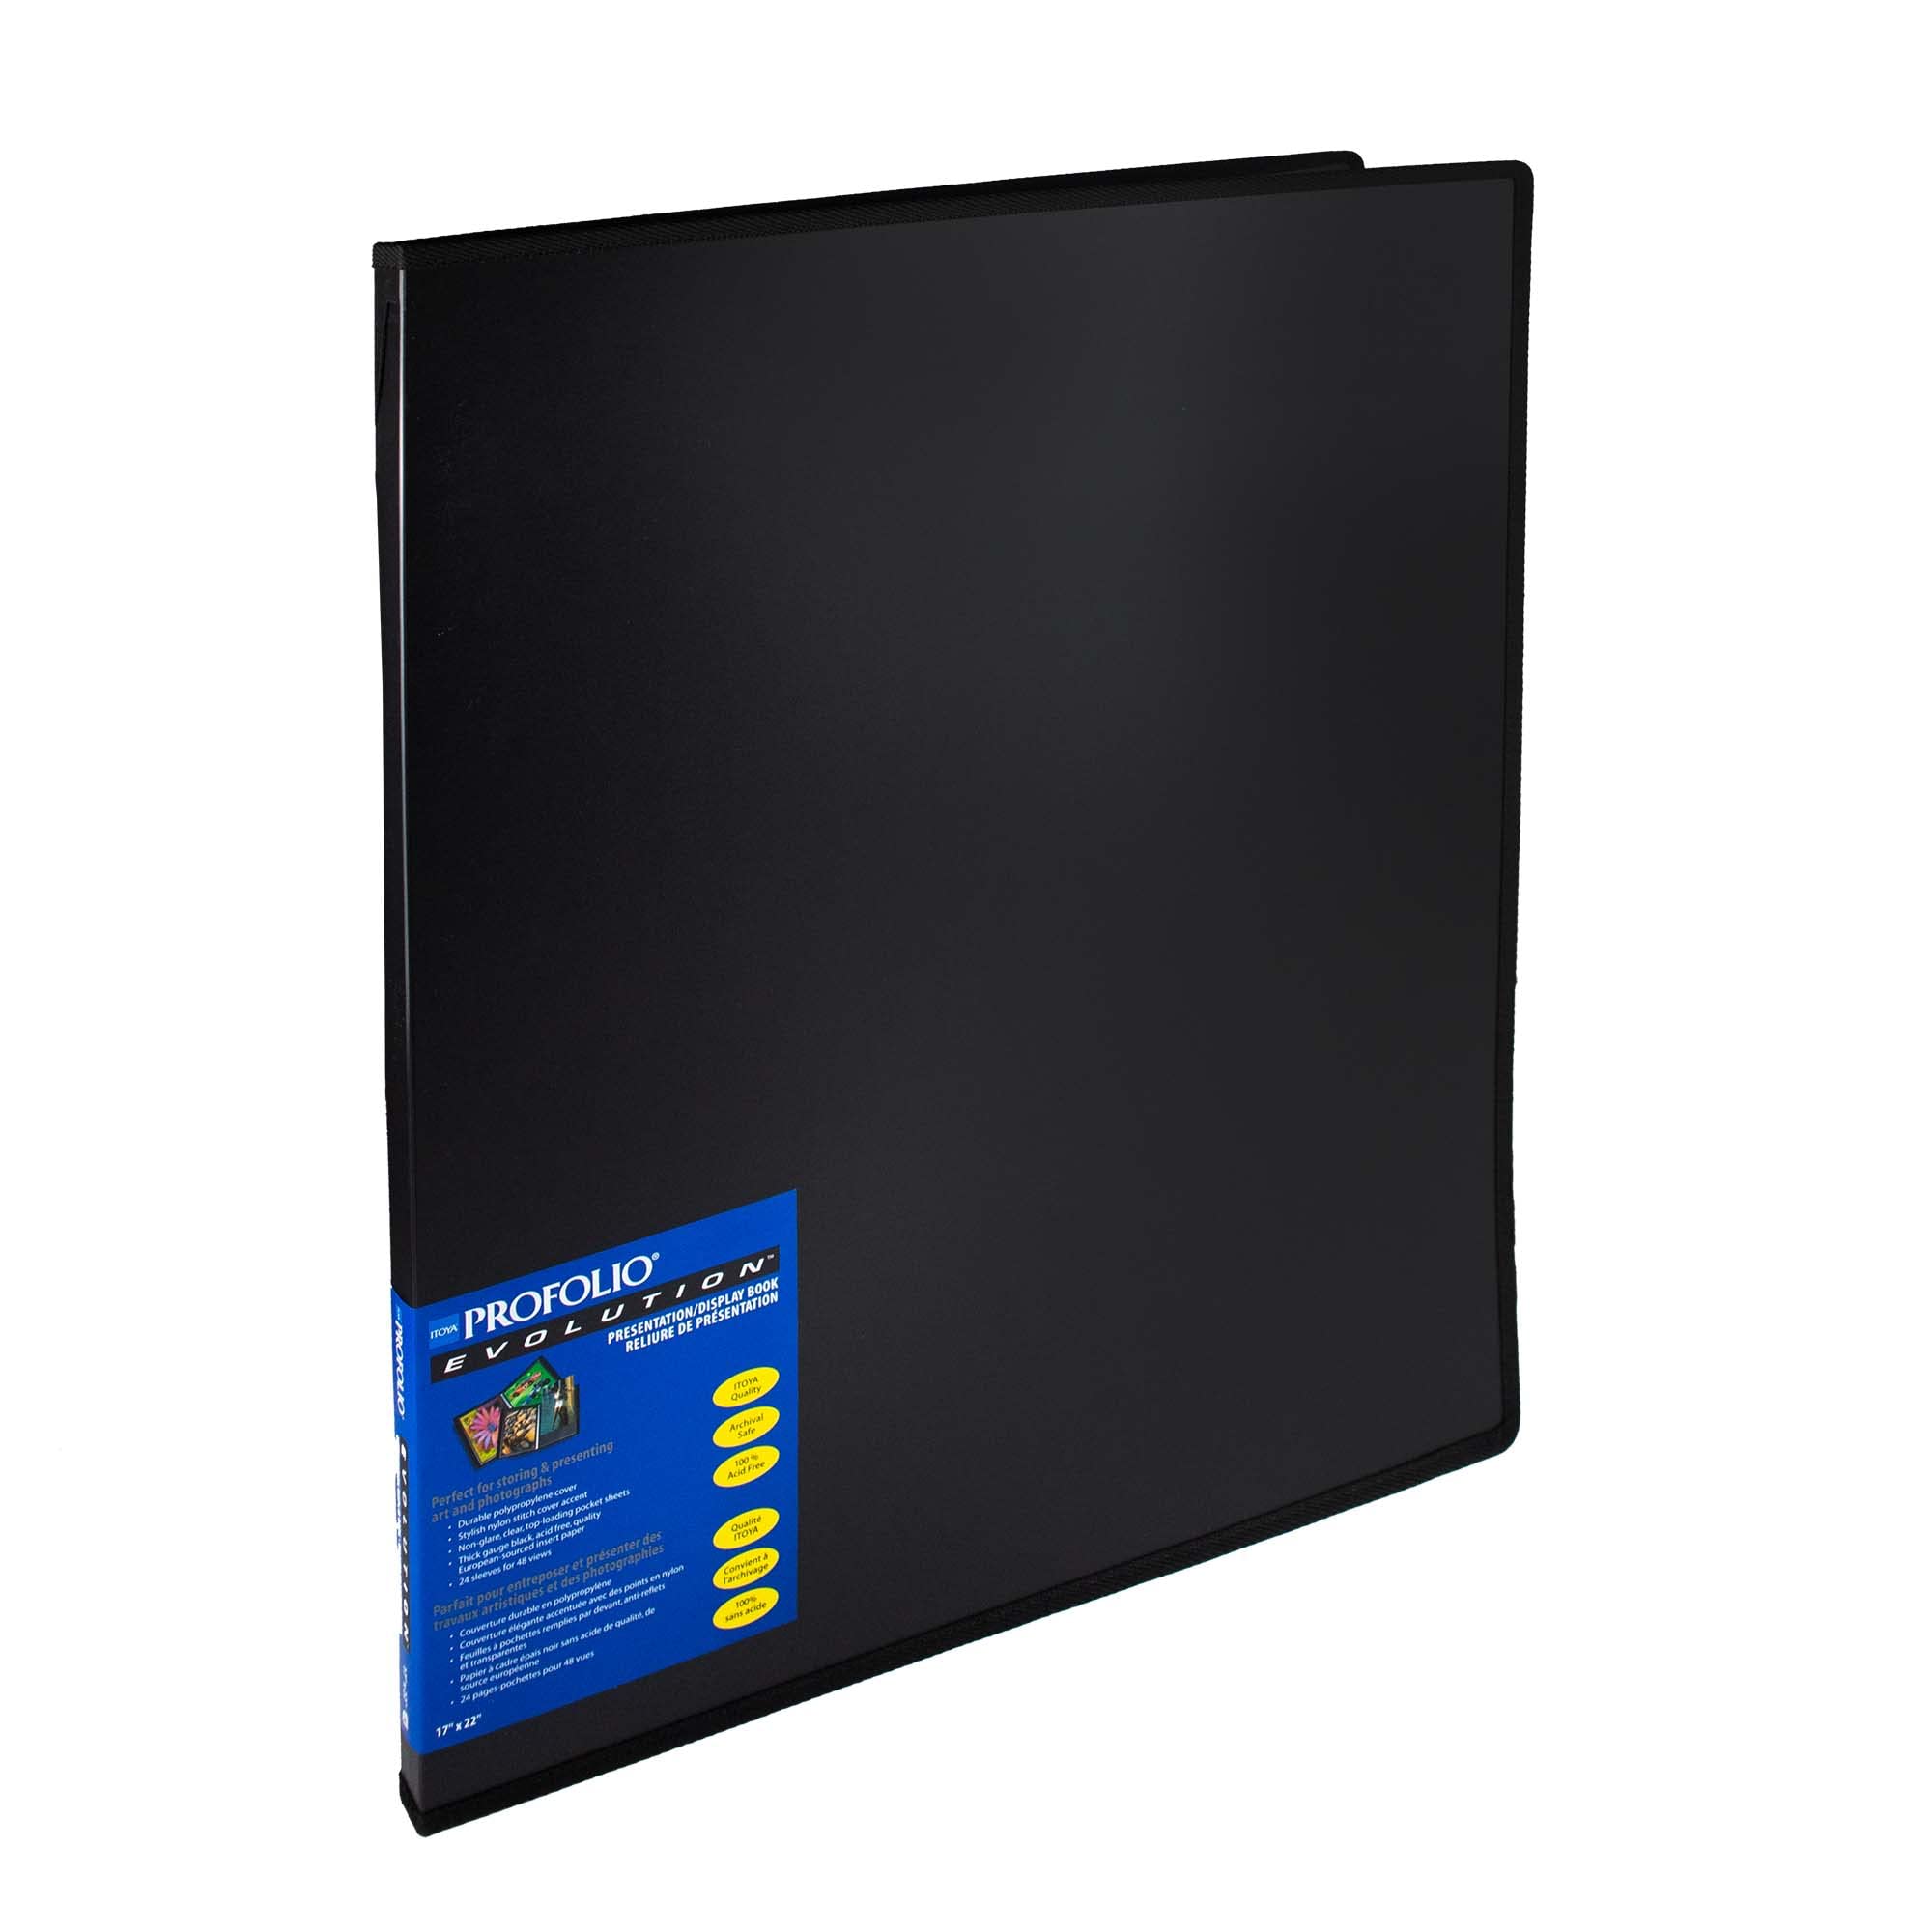 Itoya 8.5x11 Presentation Portfolio with Clear Cover, 6 Sleeves